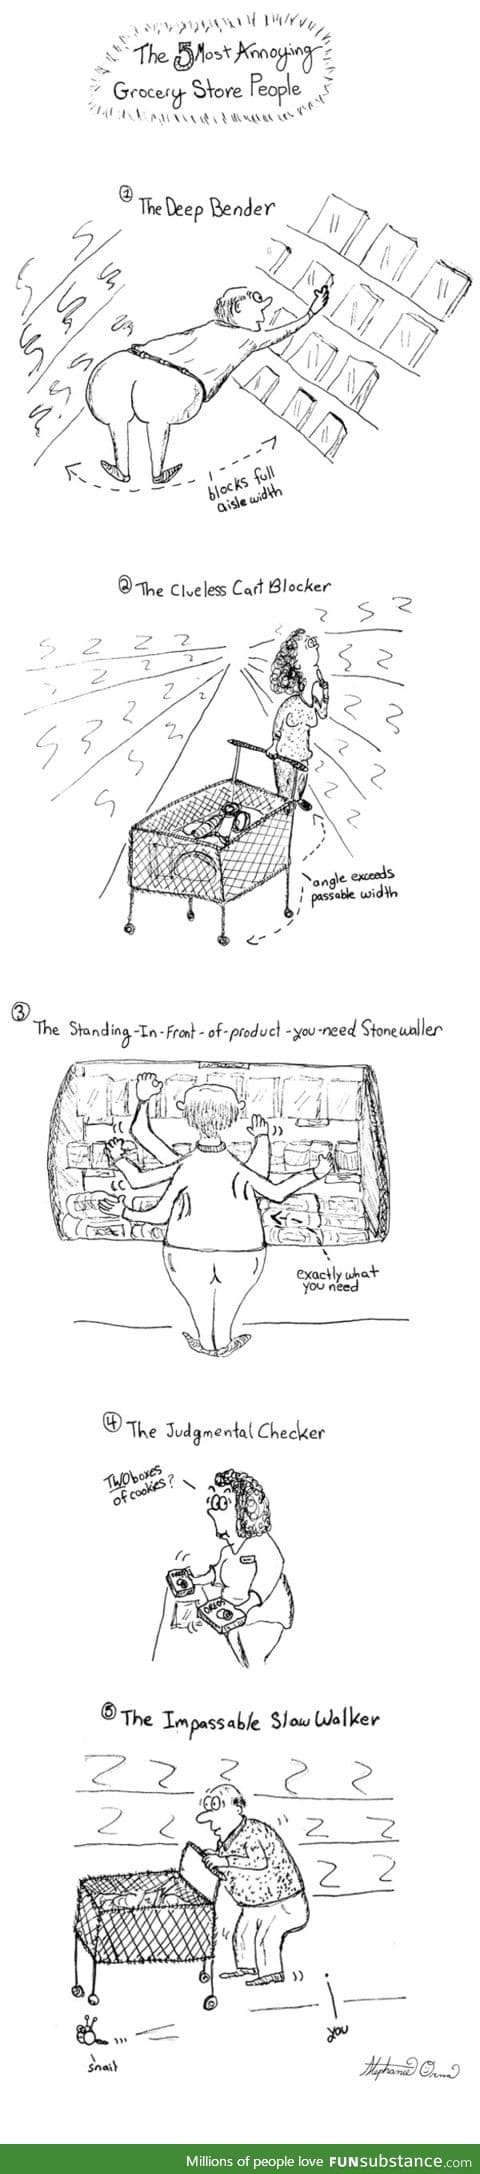 The 5 Most Annoying People At the Grocery Store by Stephanie Orma